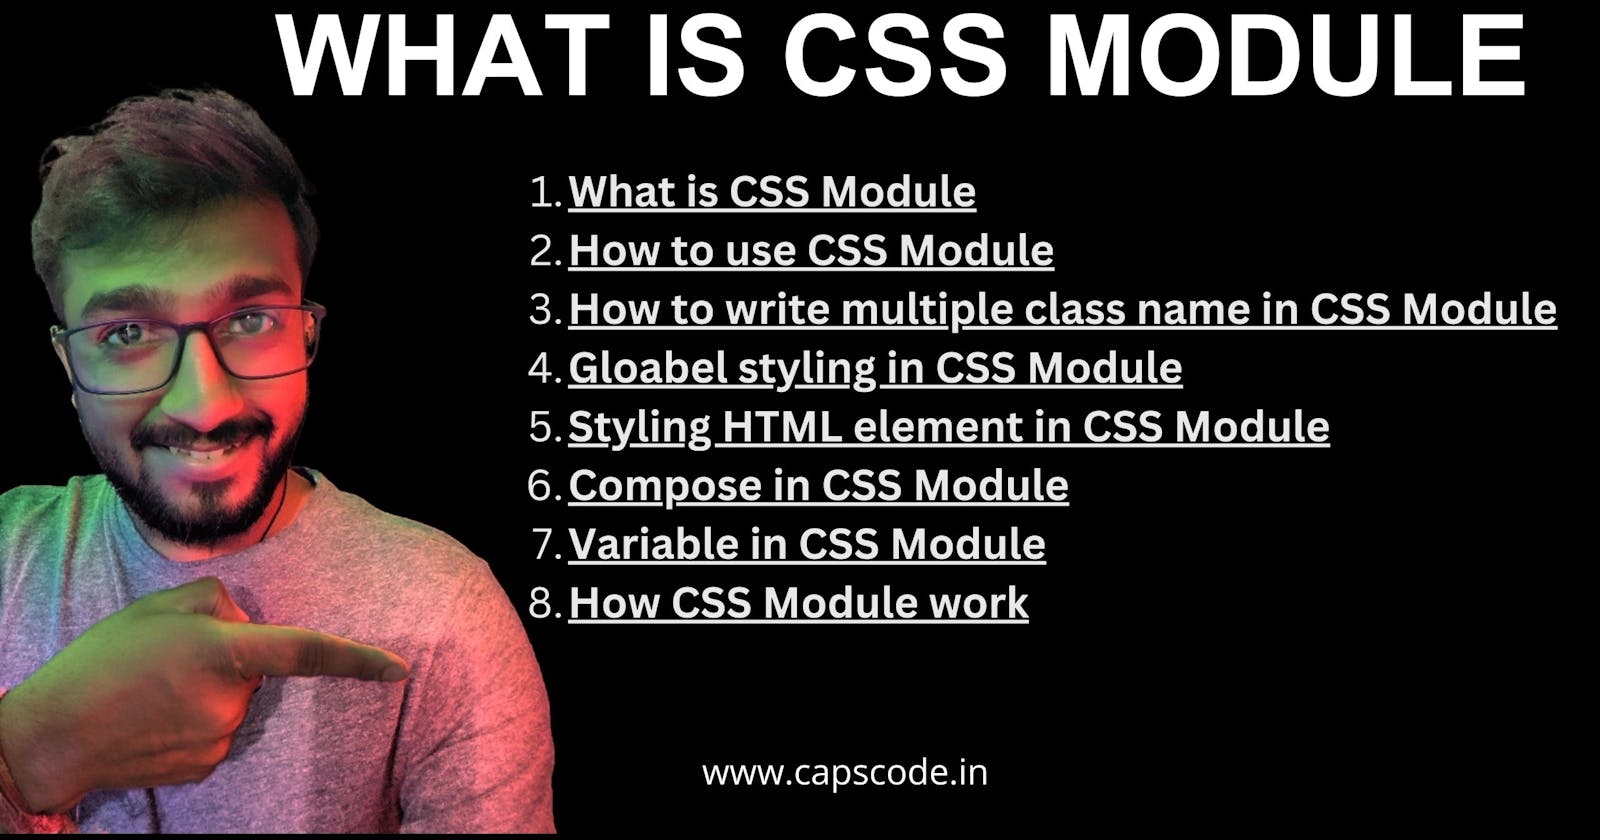 What is CSS Module?